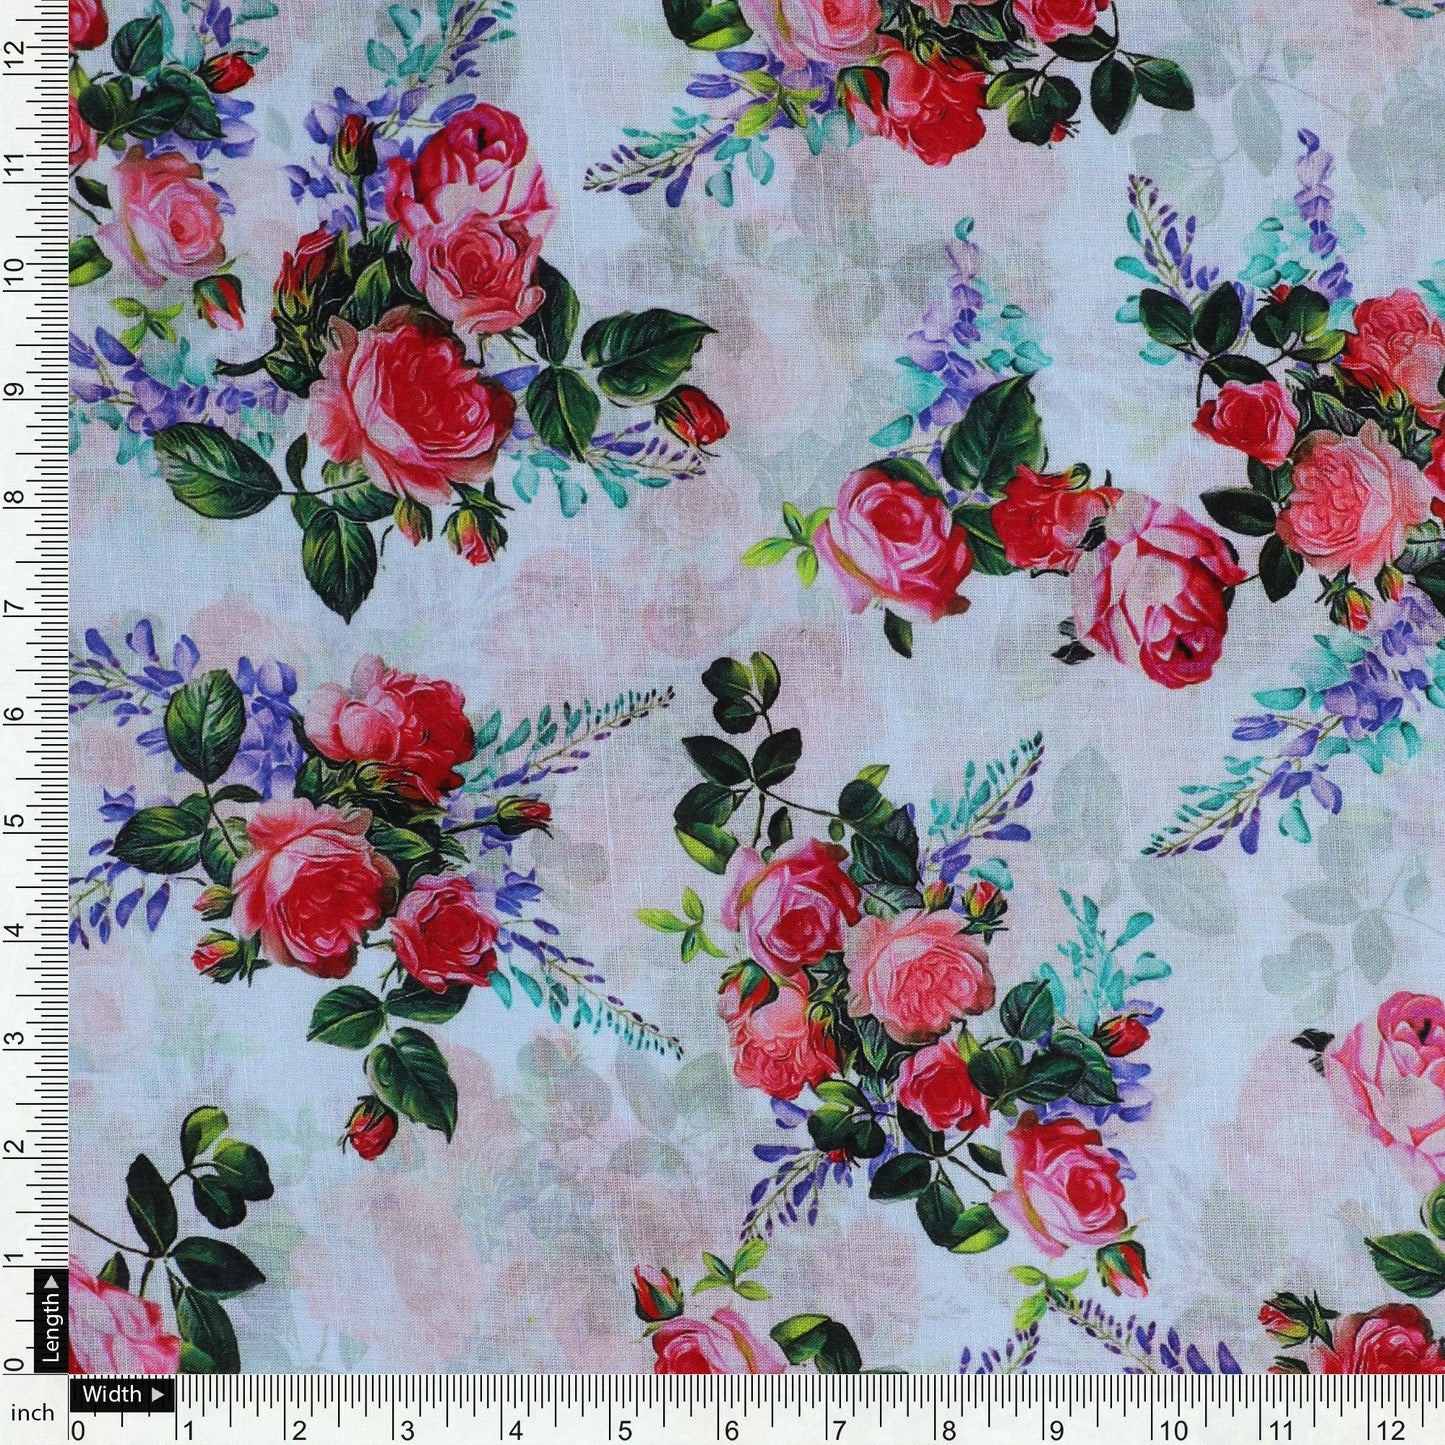 Red Rose Bunch Repeat Digital Printed Fabric - Pure Cotton - FAB VOGUE Studio®